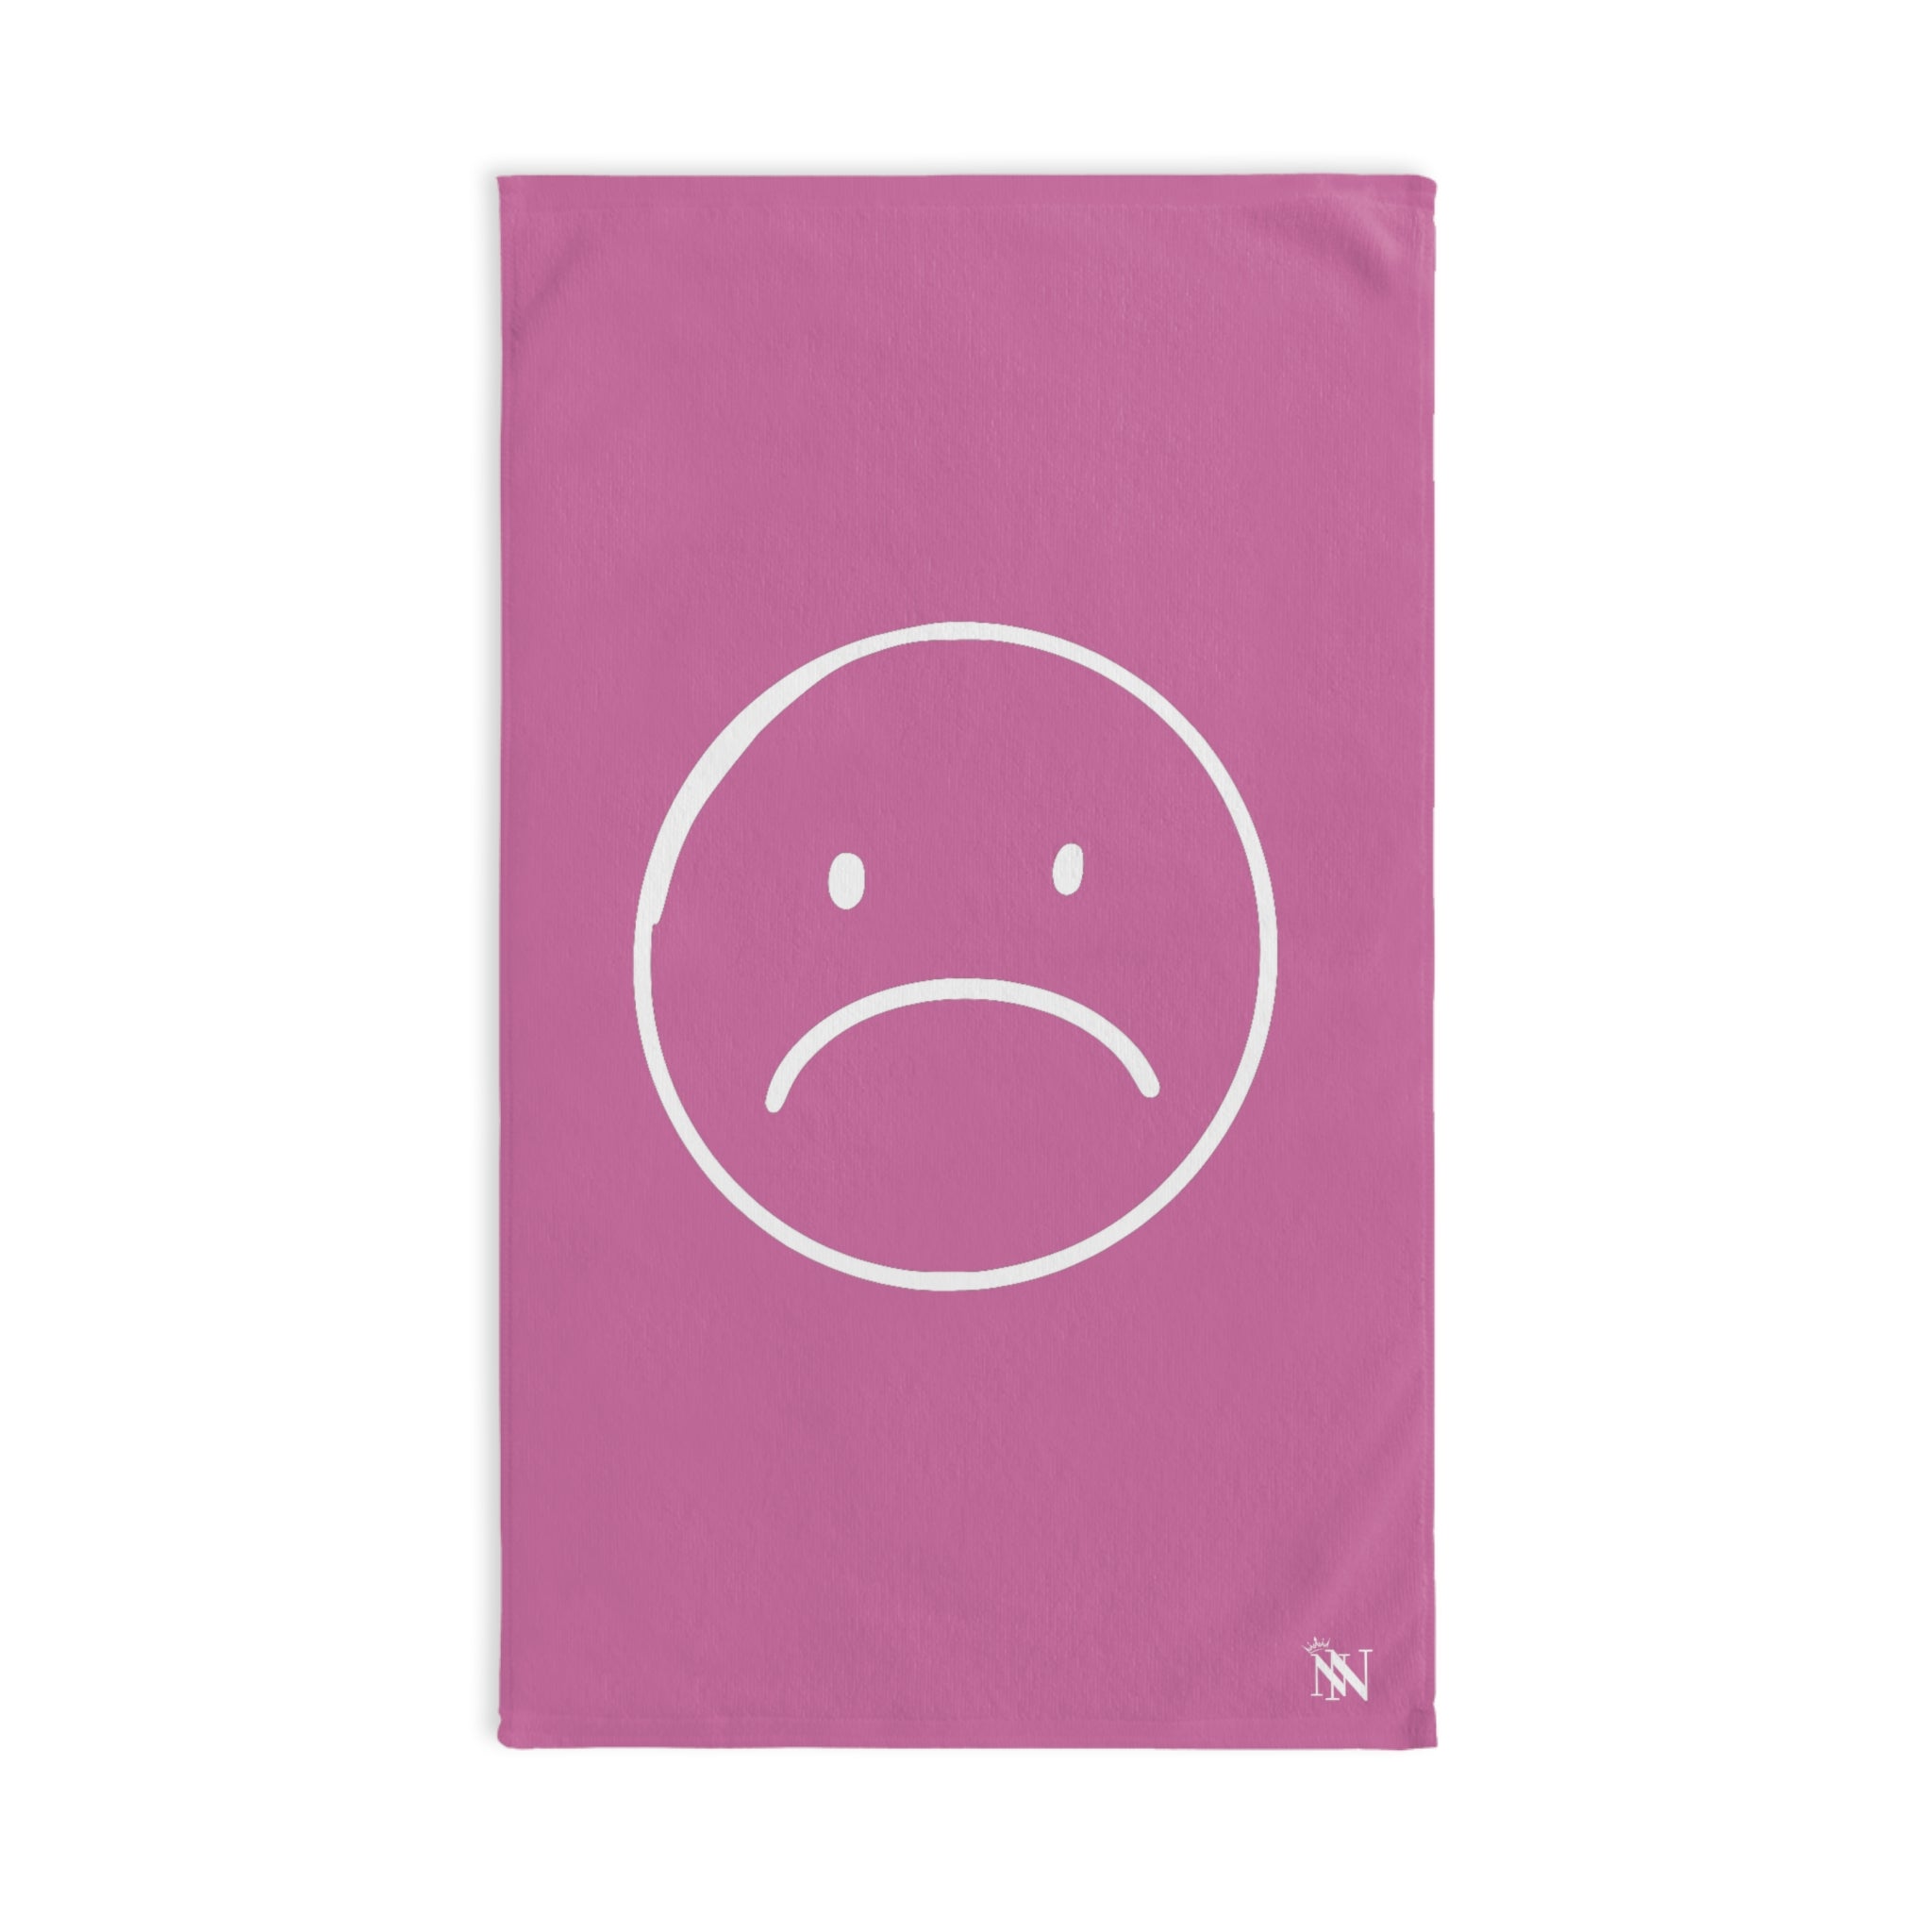 Sad Frown WhitePink | Novelty Gifts for Boyfriend, Funny Towel Romantic Gift for Wedding Couple Fiance First Year Anniversary Valentines, Party Gag Gifts, Joke Humor Cloth for Husband Men BF NECTAR NAPKINS